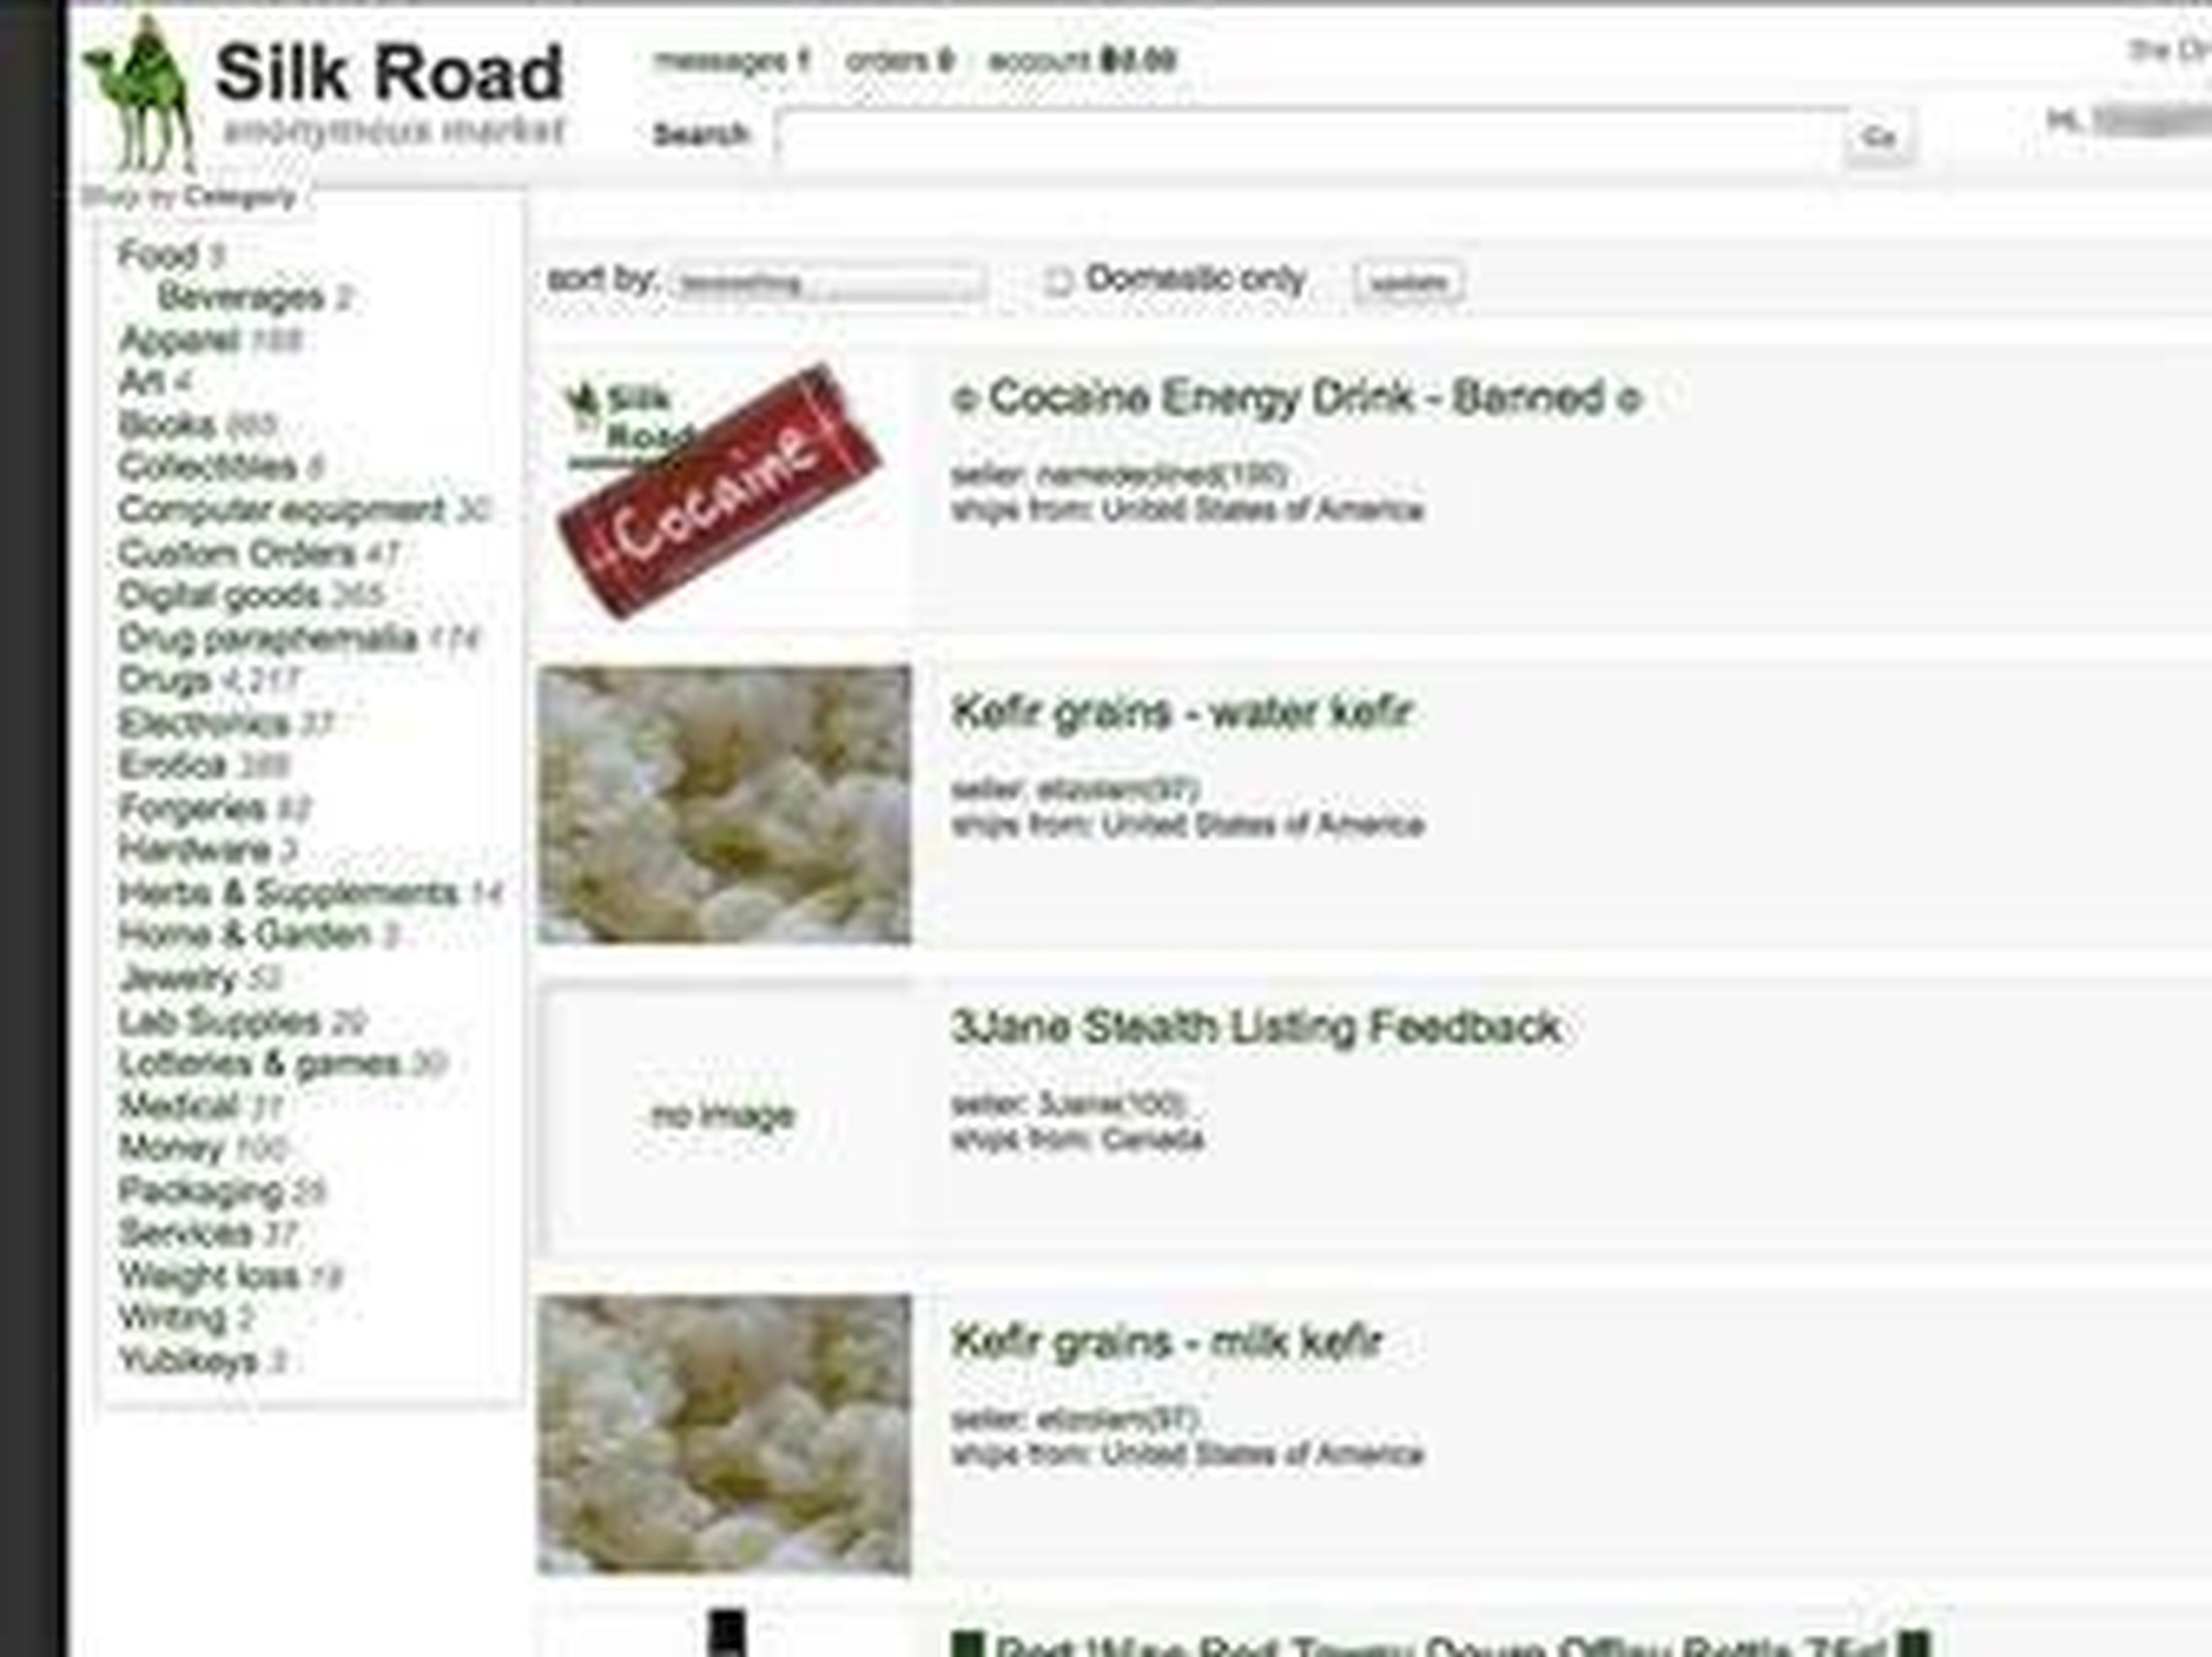 February 2011: Silk Road, the first dark-web marketplace, is founded by Ross Ulbricht.